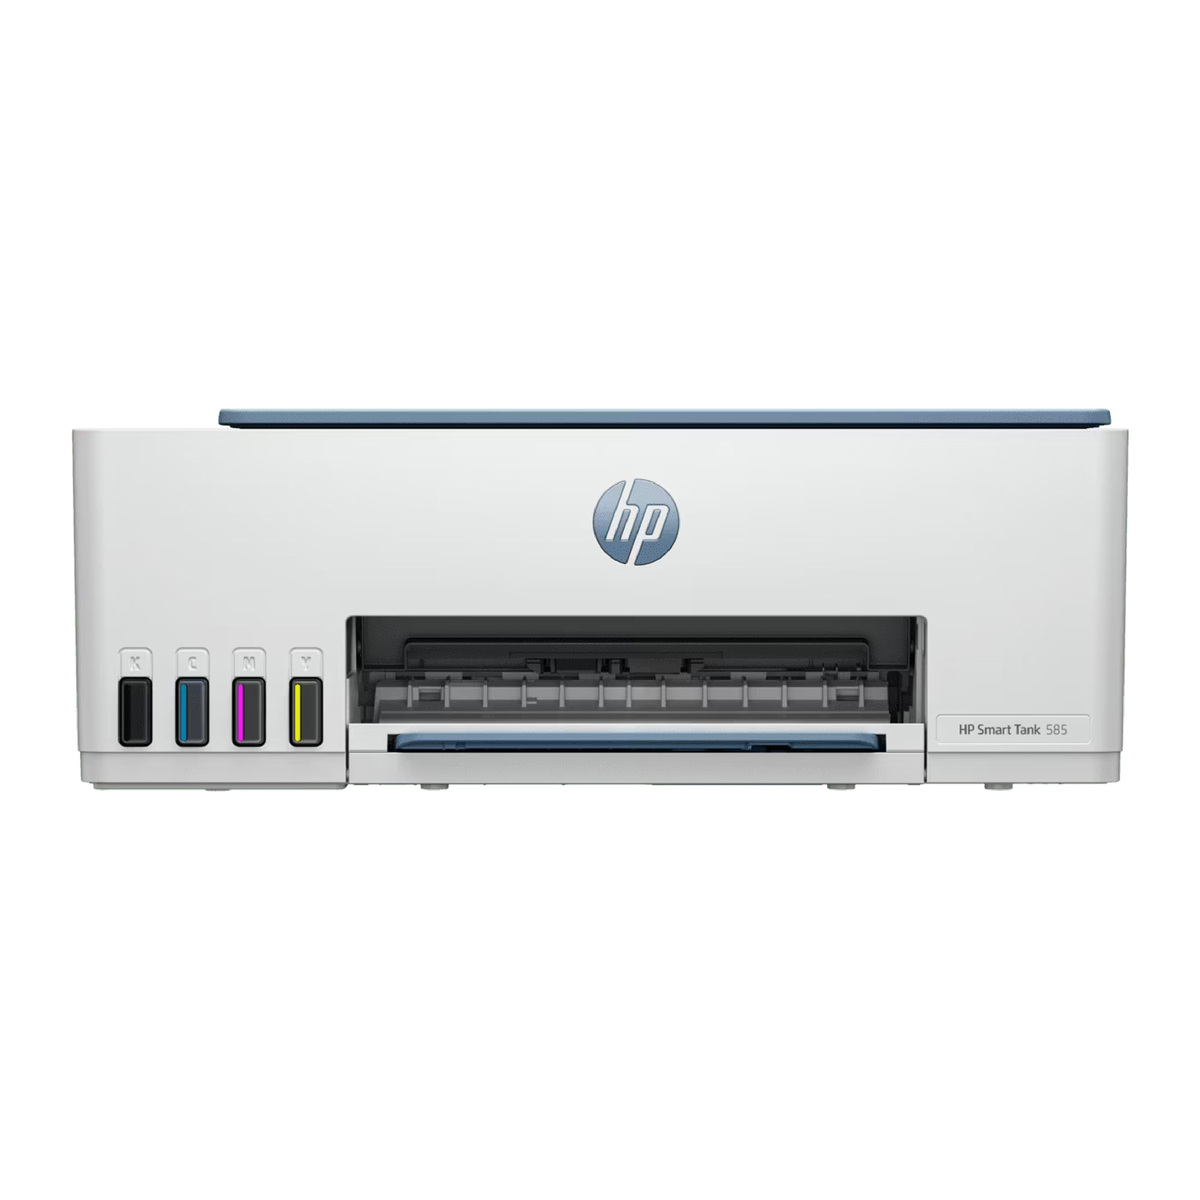 HP Smart Tank 585 All-in-One Printer (1F3Y4A) Blue